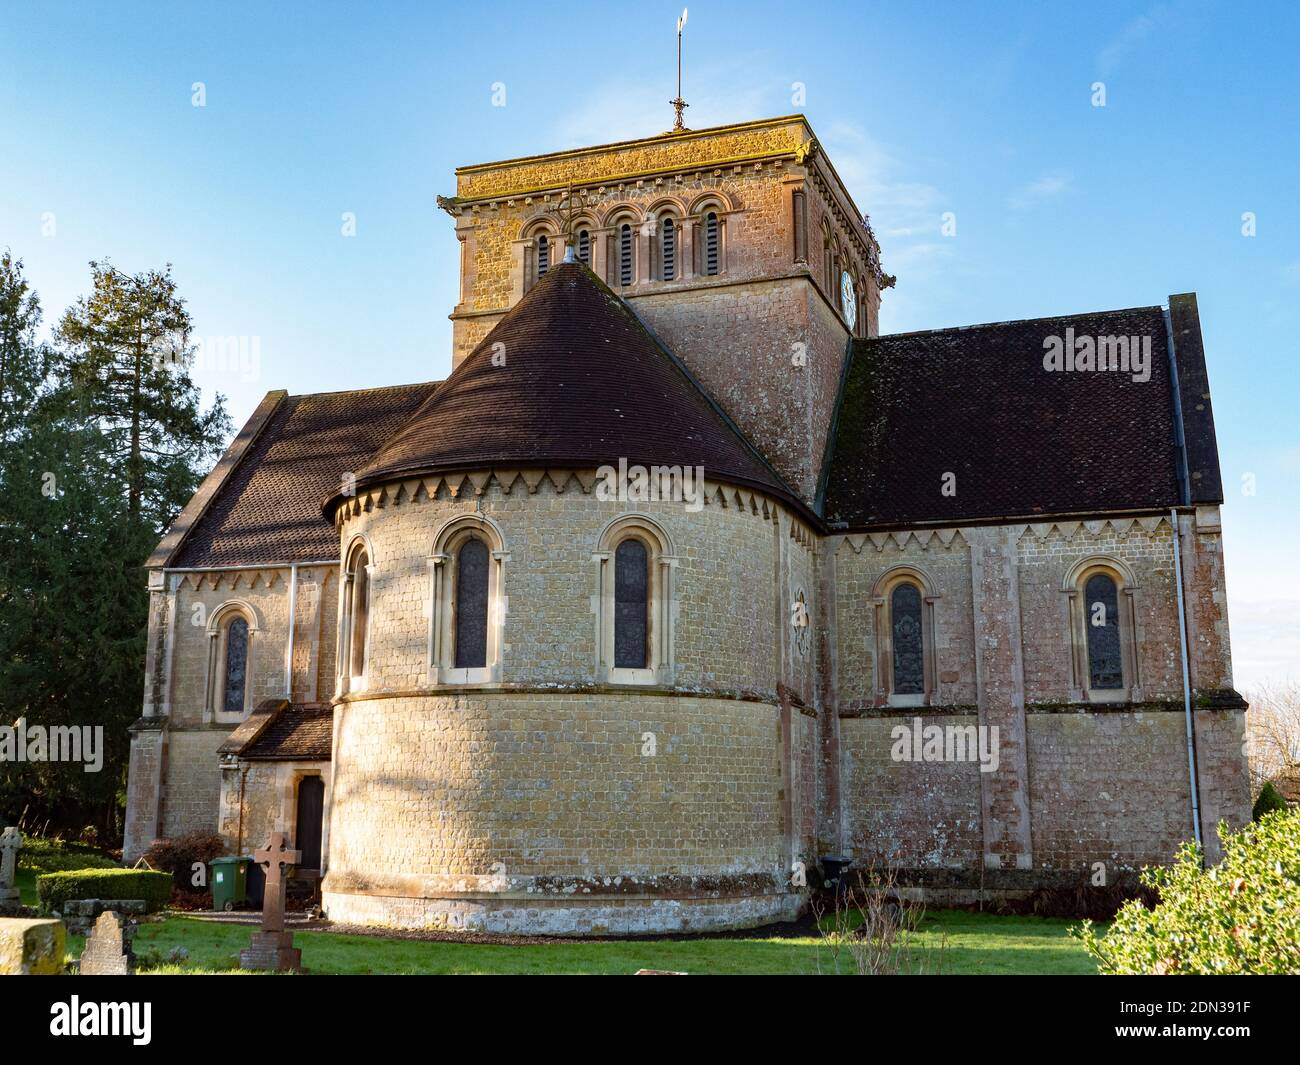 The 19th century Holy Trinity Church at Dilton Marsh, Wiltshire, England from the churchyard and showing the transepts, apse and bell tower. Stock Photo